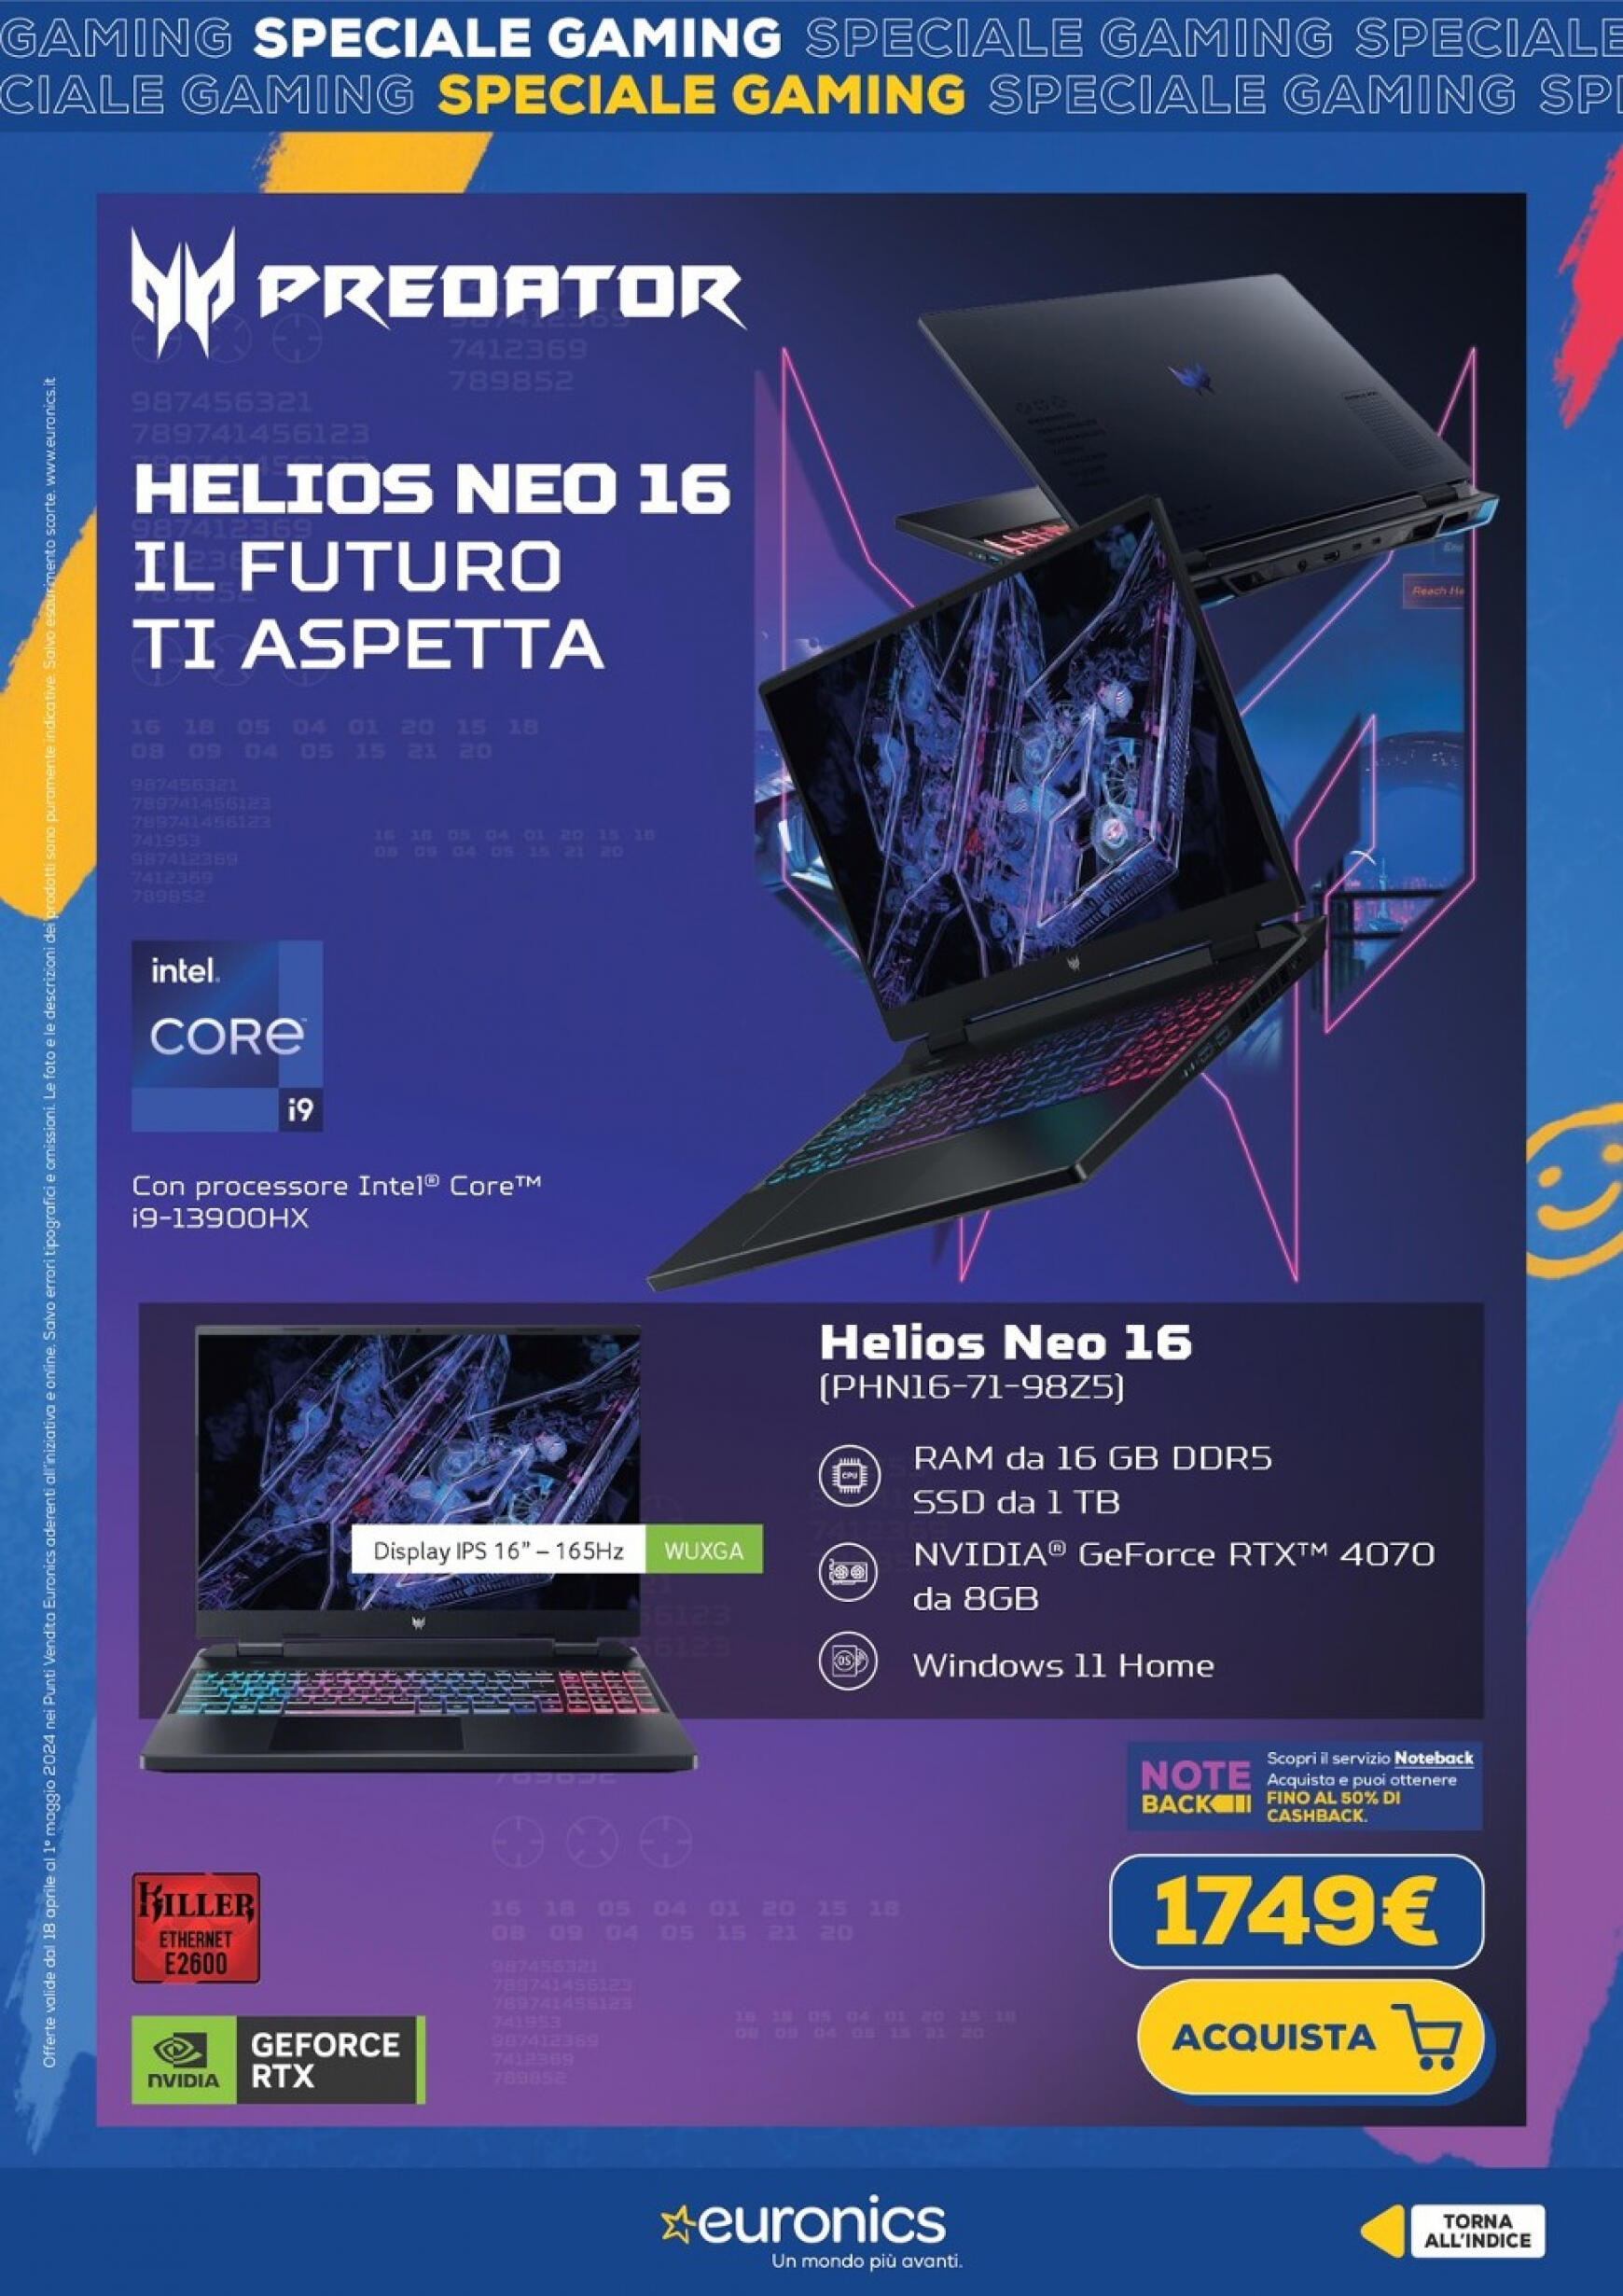 euronics - Nuovo volantino Euronics - Speciale Gaming 18.04. - 01.05. - page: 3